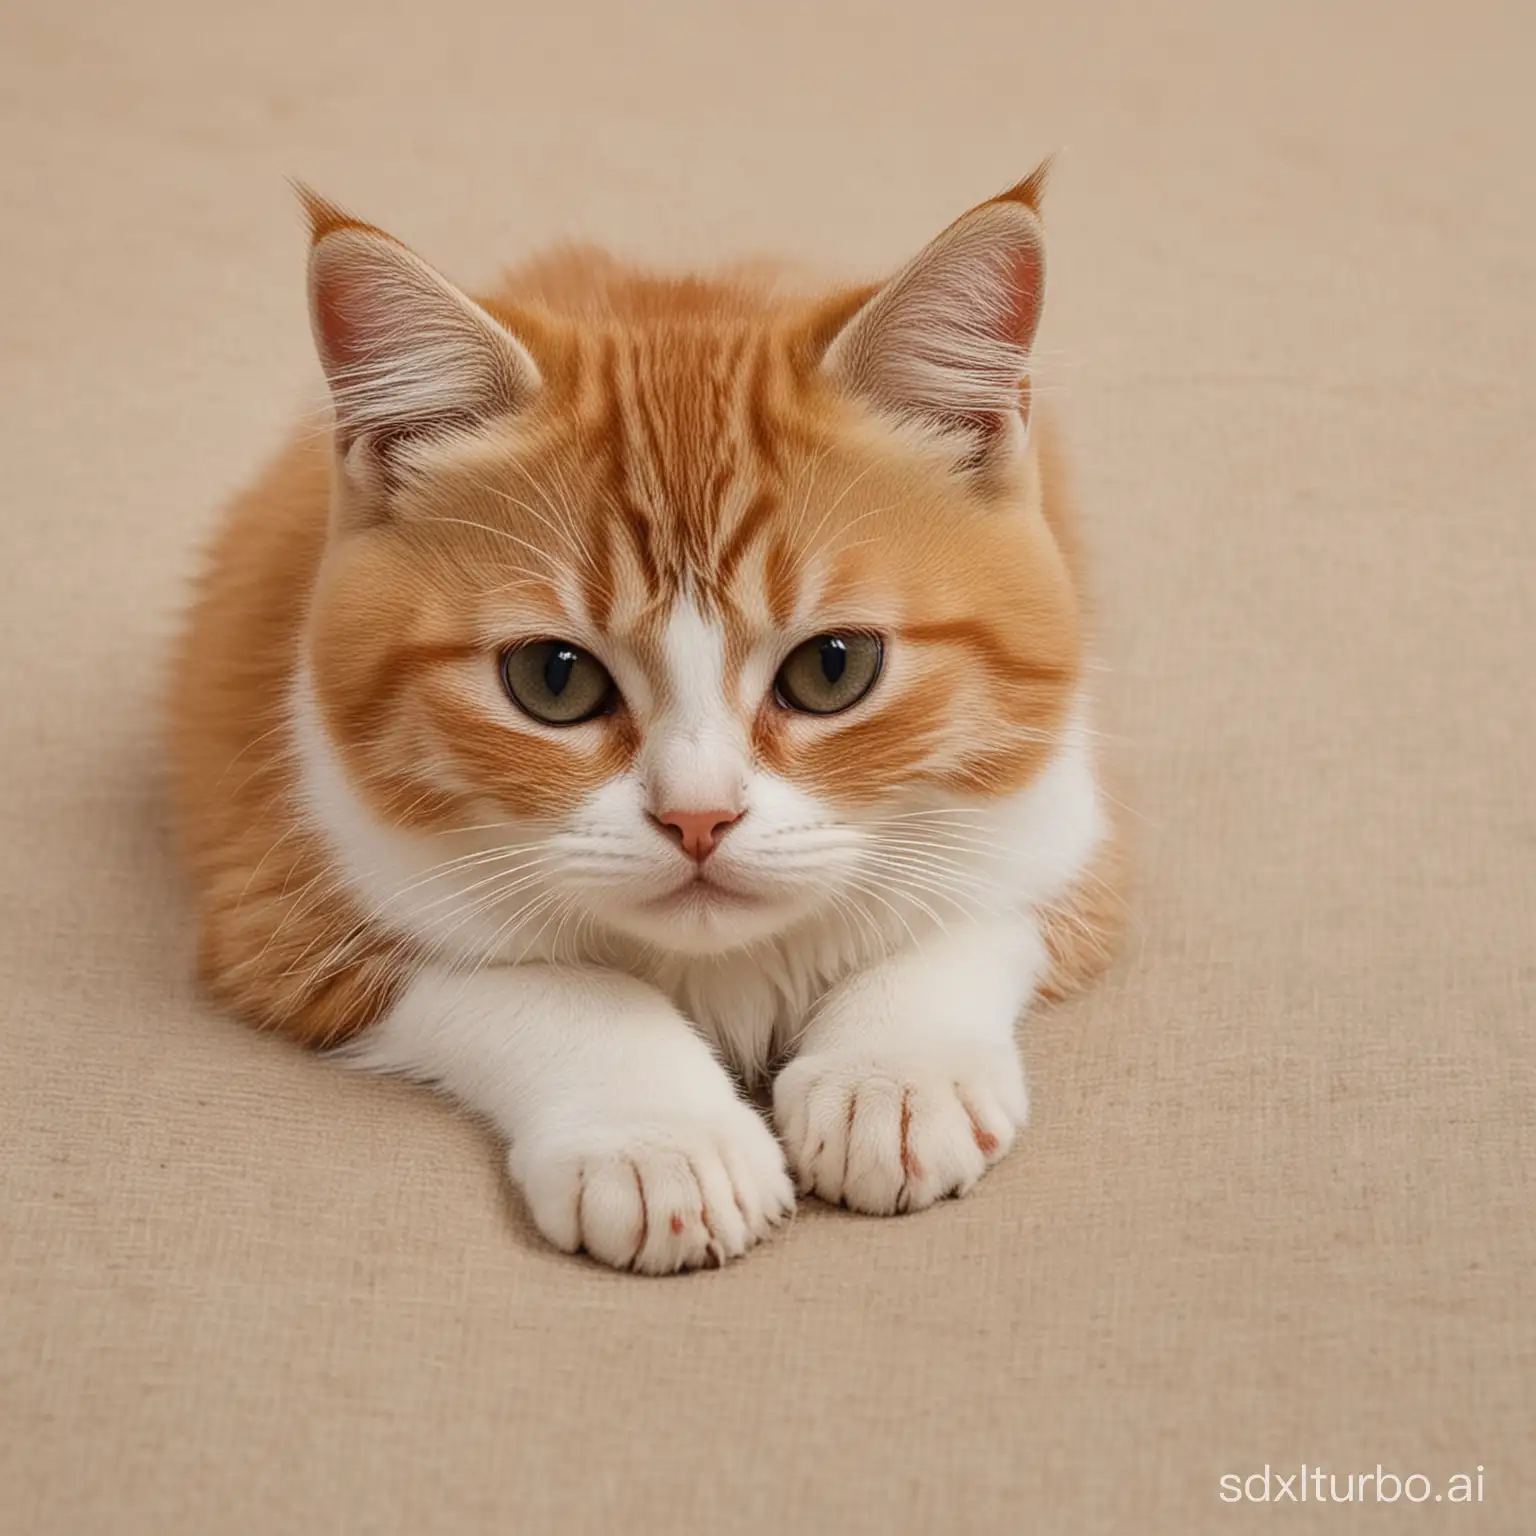 Adorable-Little-Cat-Sulking-in-a-Heartwarming-Display-of-Pet-Emotion